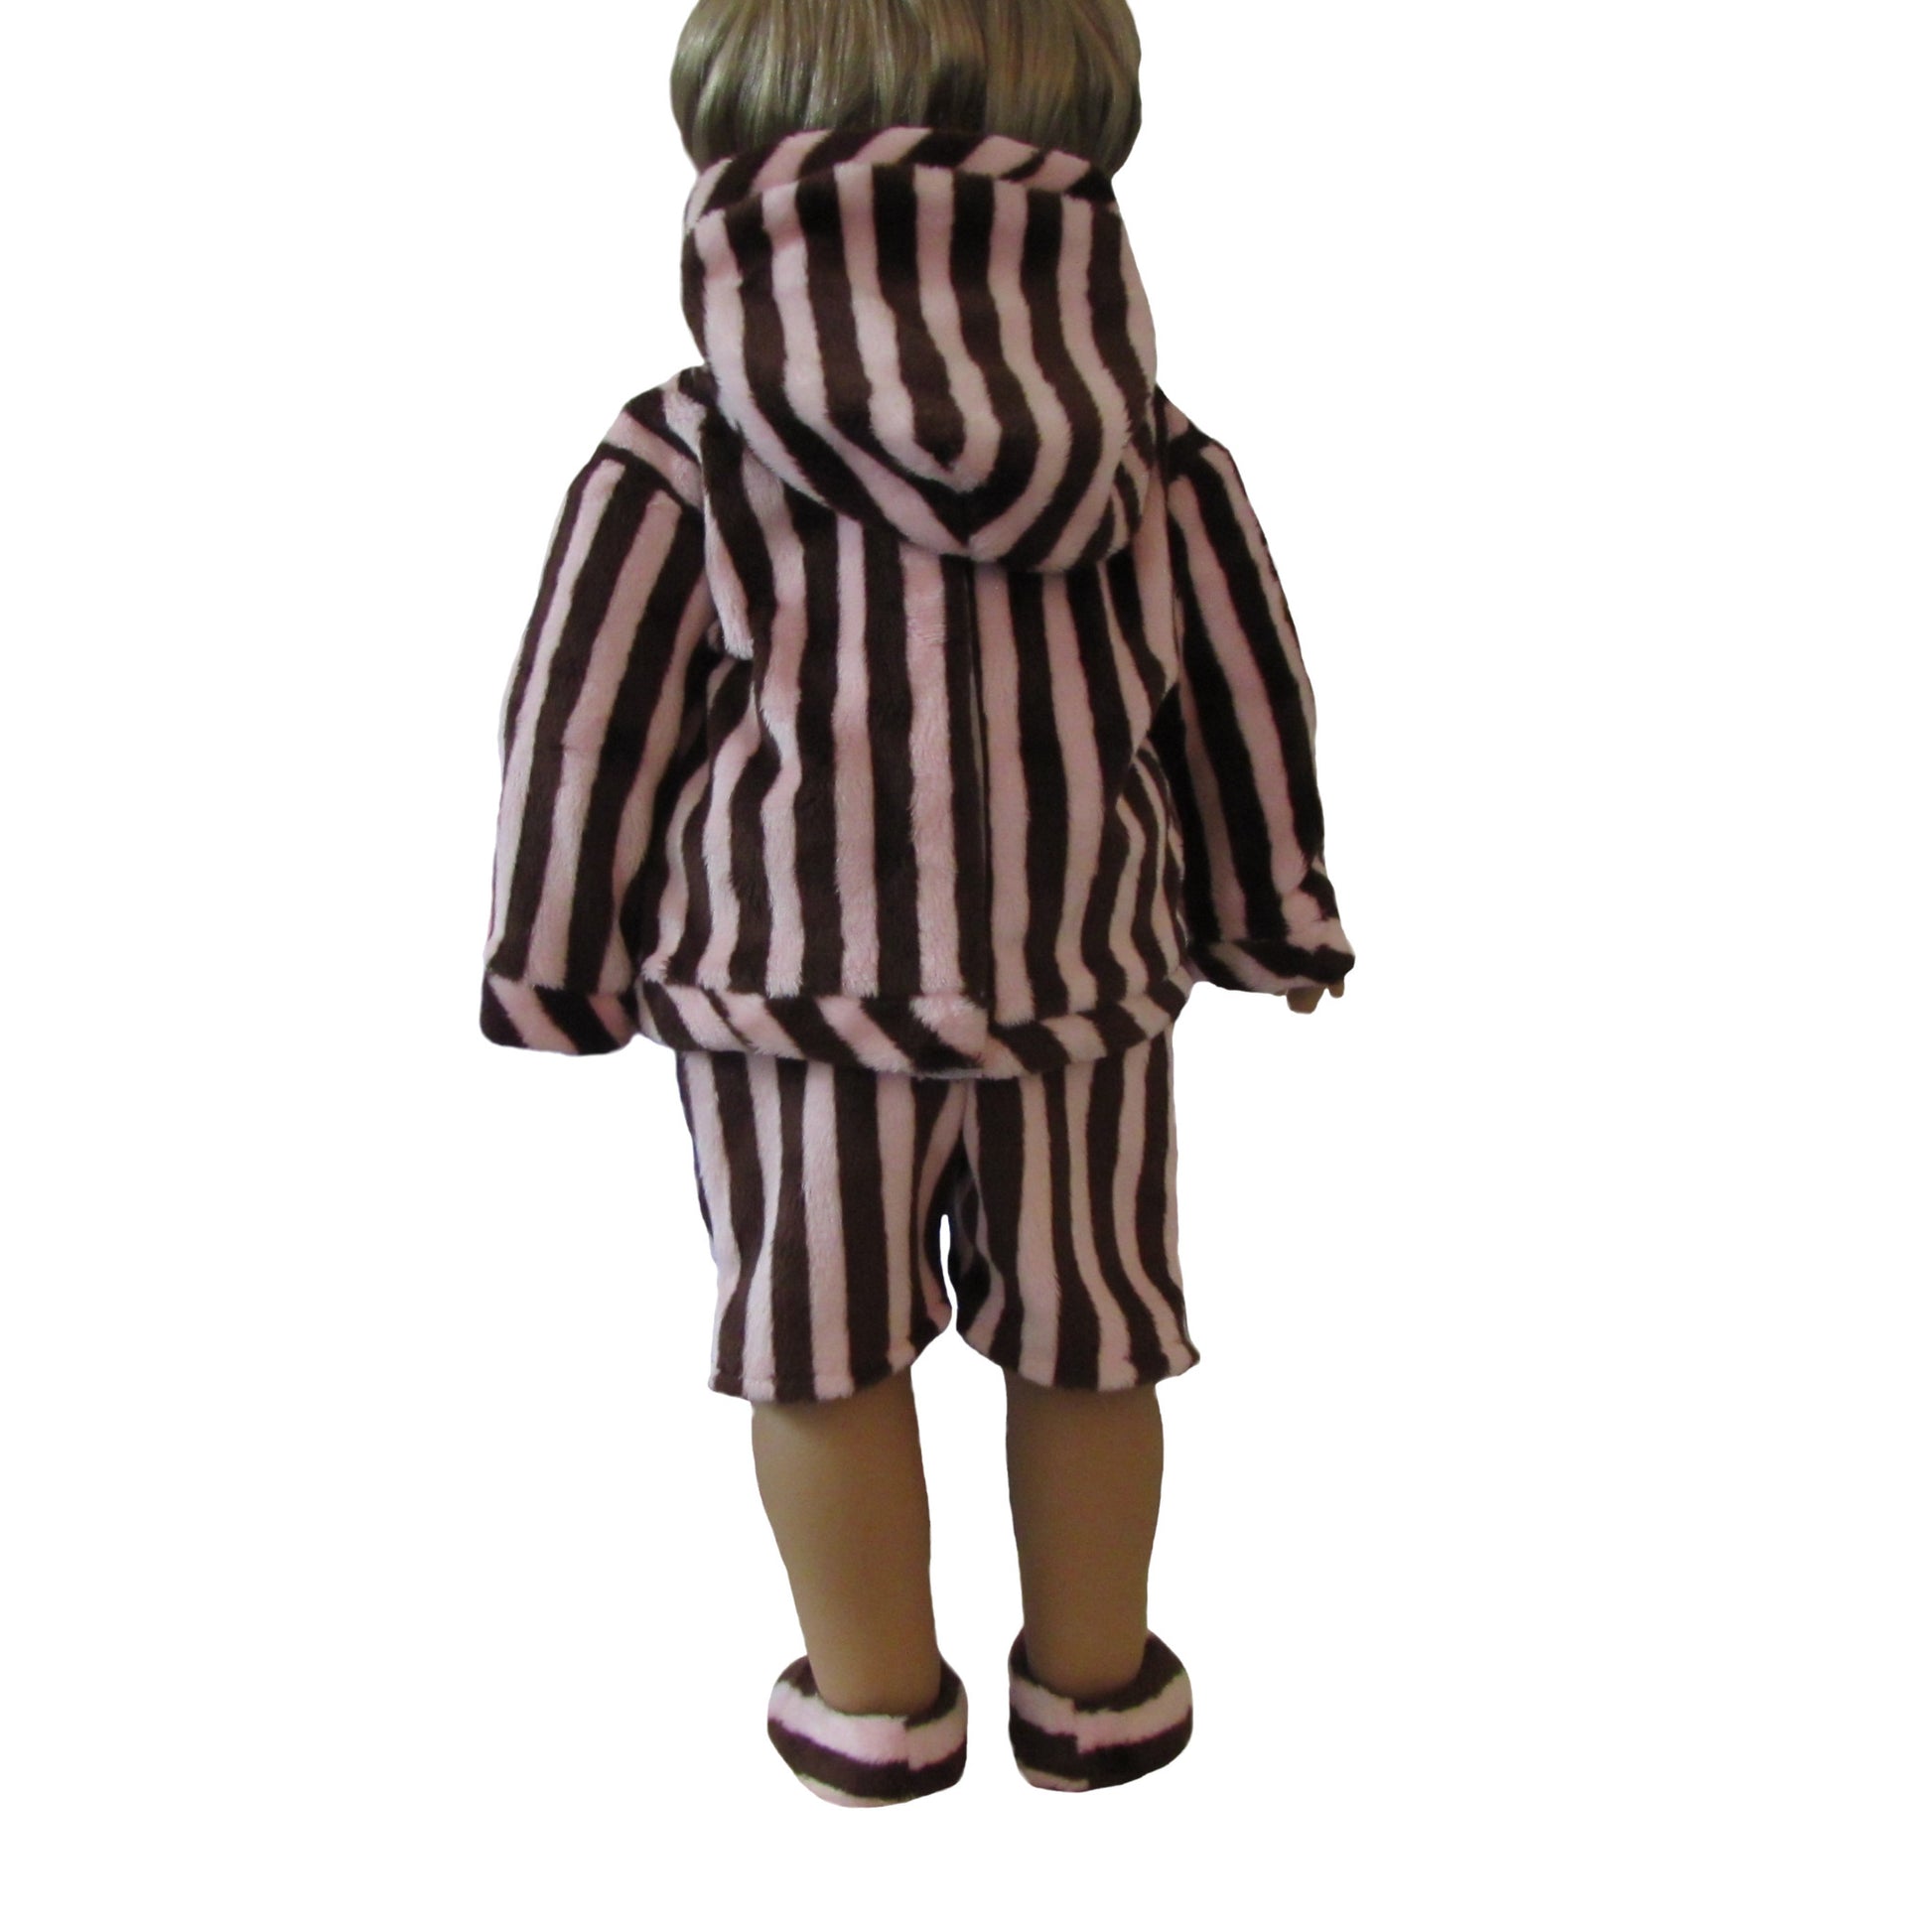 Pink and Brown Minky Cuddle Striped Doll Hoodies, Shorts, and Slippers for 18-inch dolls